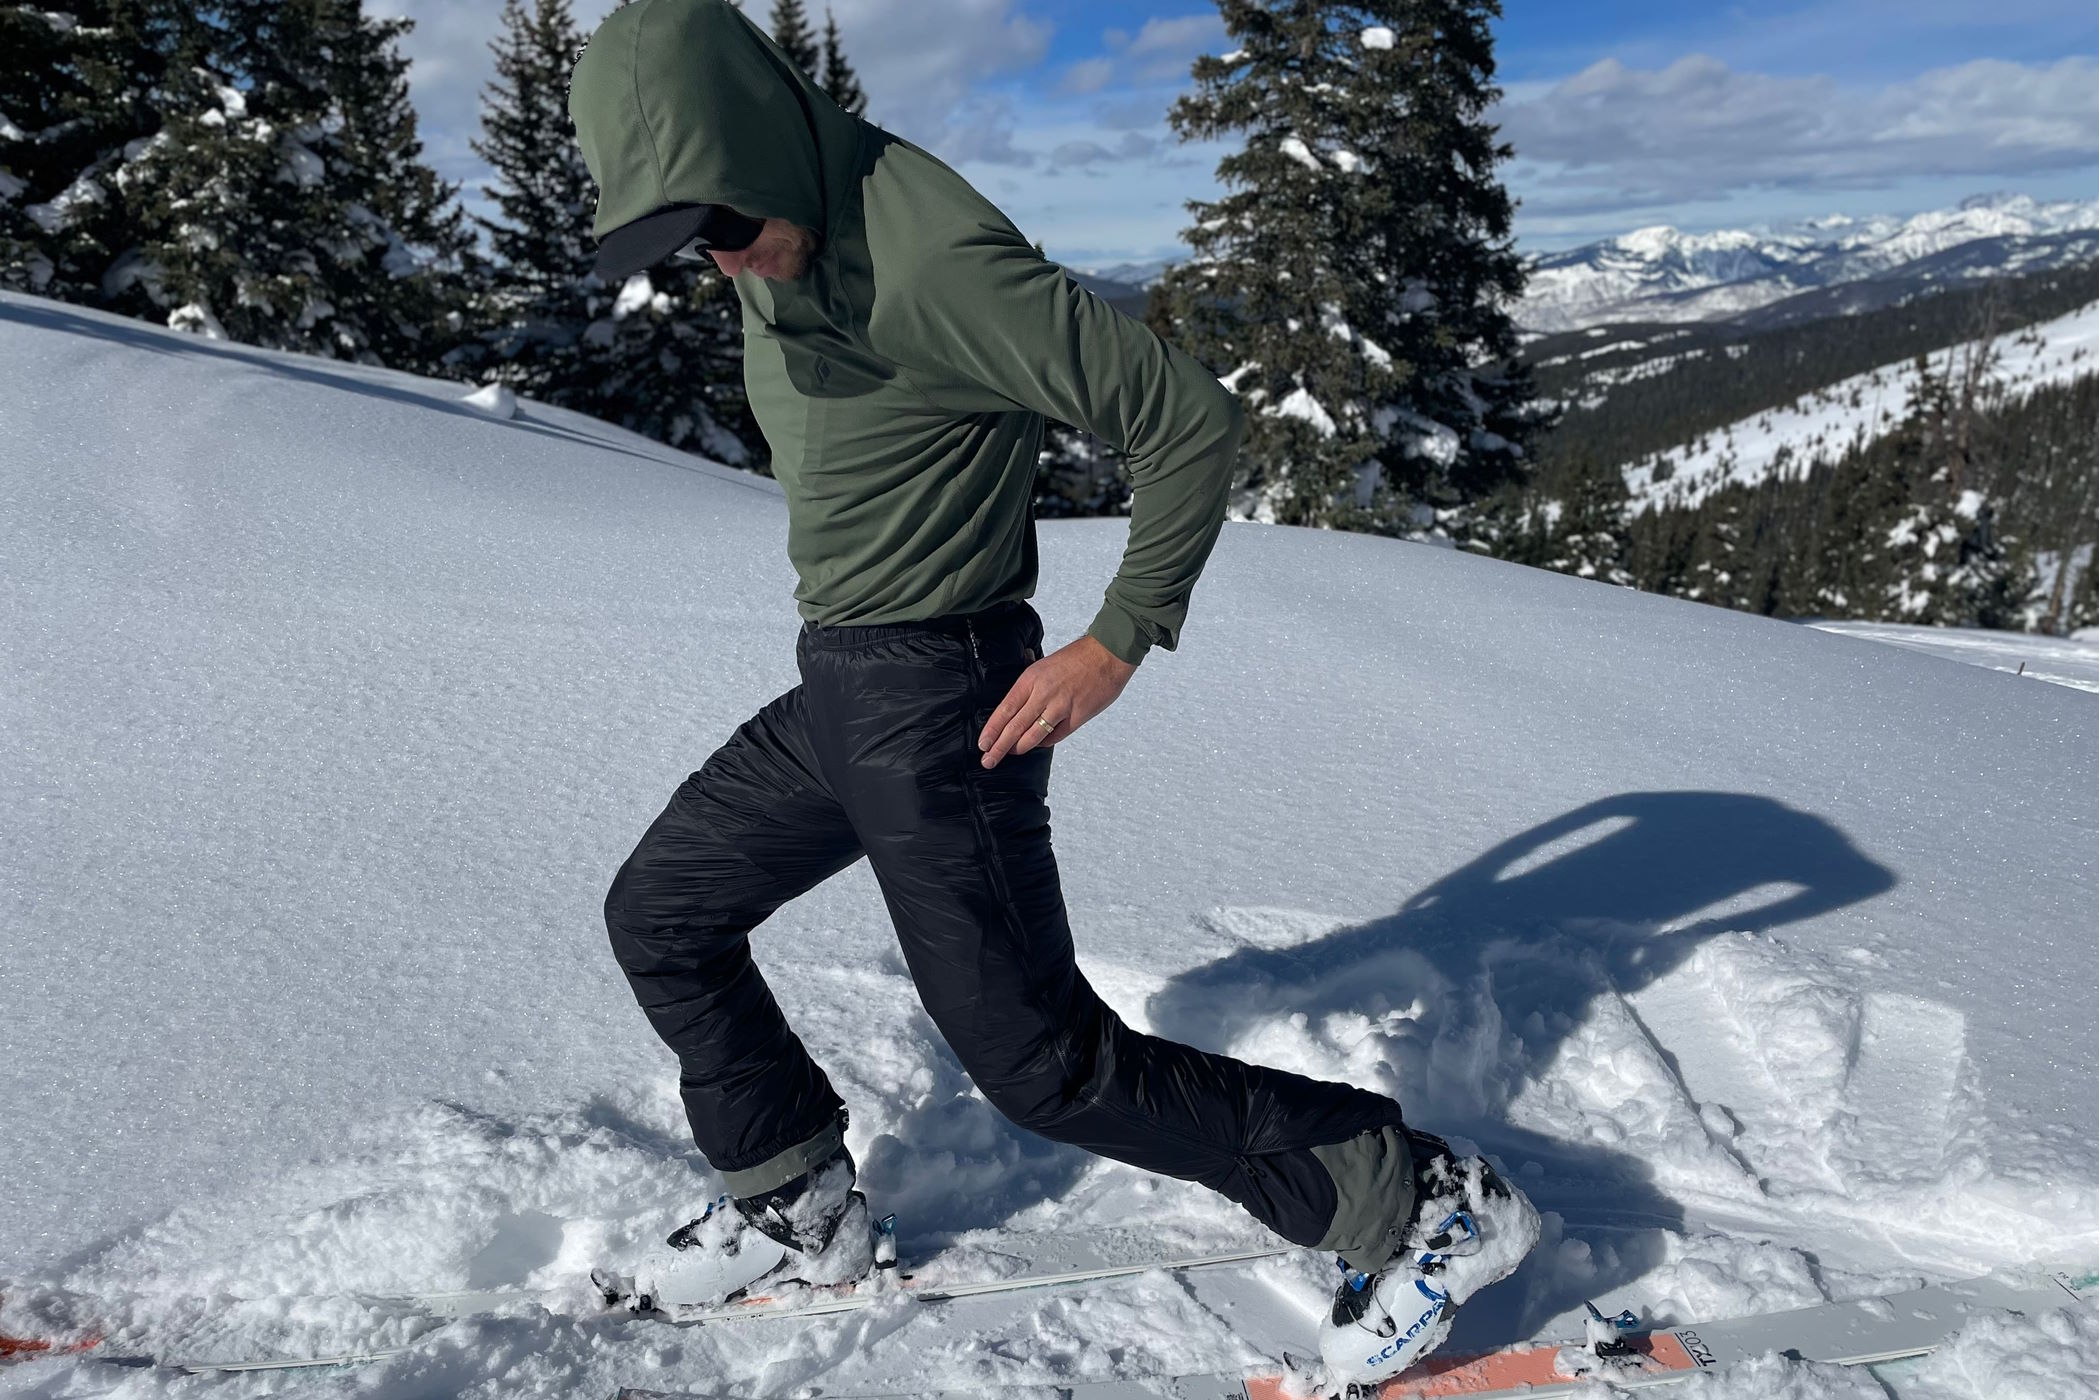 Patagonia DAS Light Pants Review: The Missing Link in Ultralight Puffy Pants